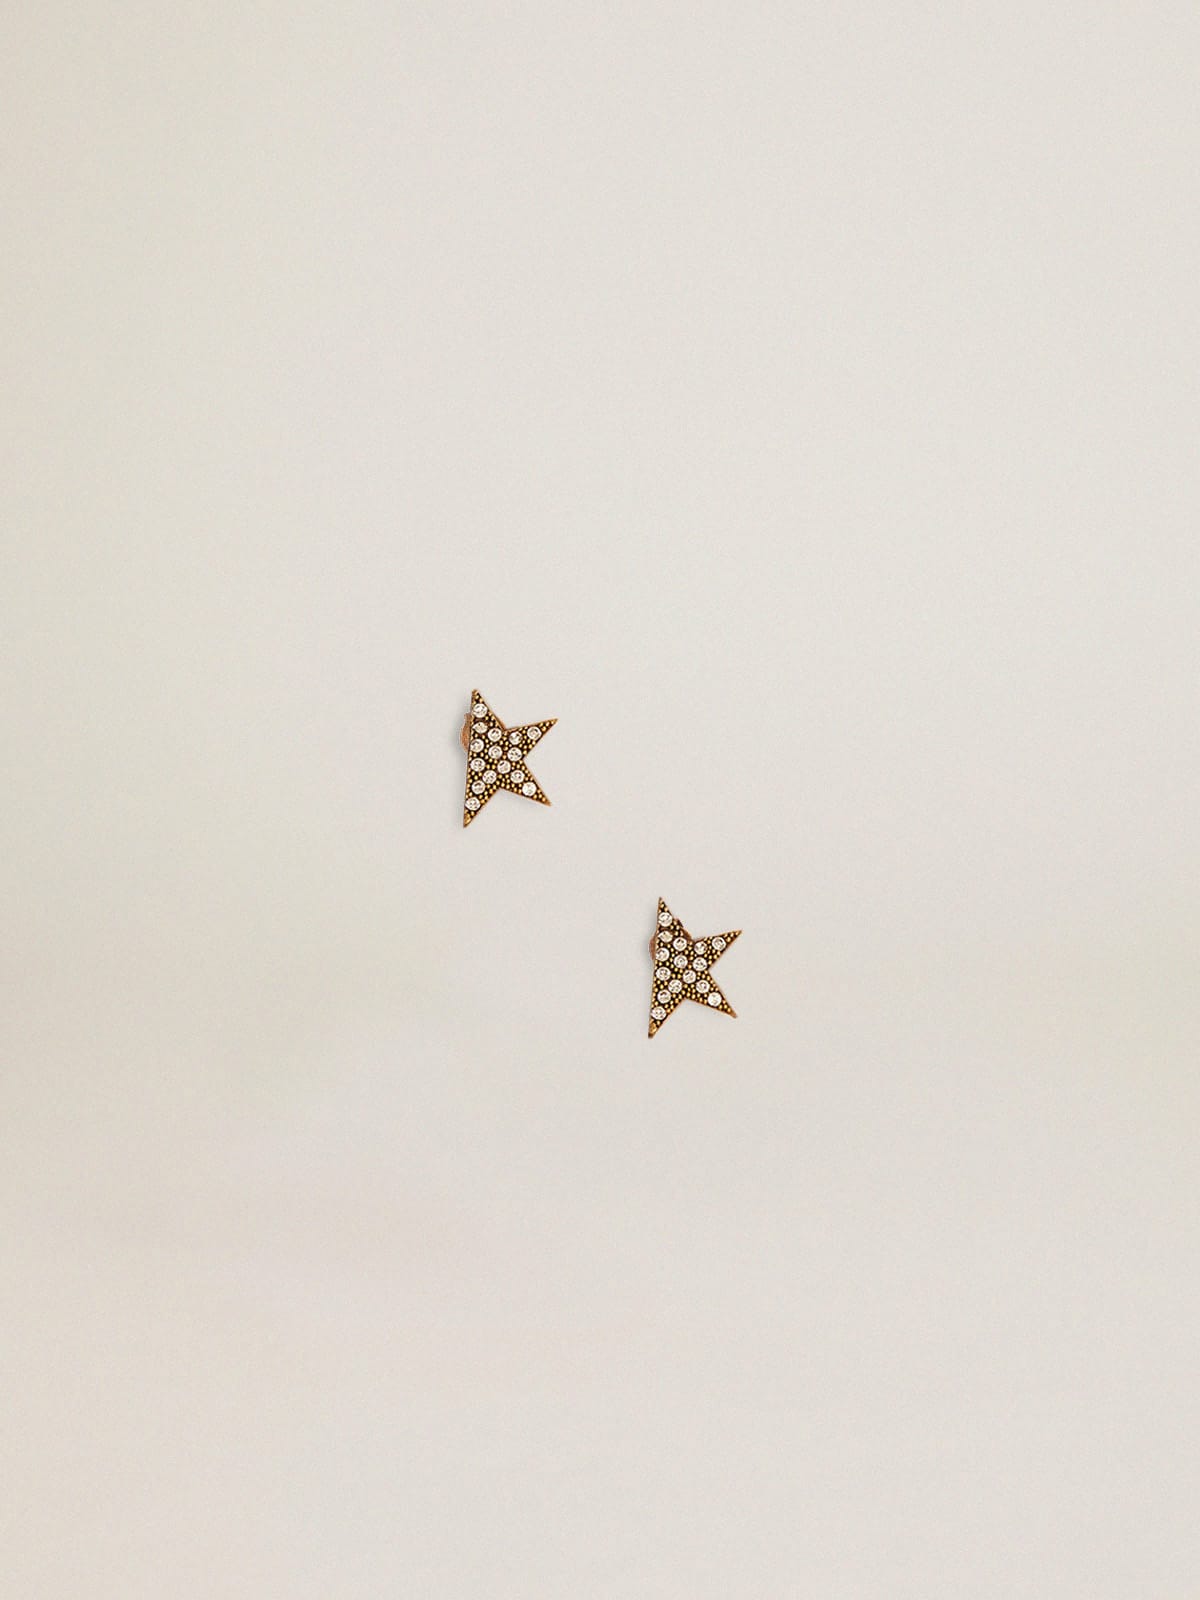 Golden Goose - Stud earrings in old gold color with decorative crystals in 